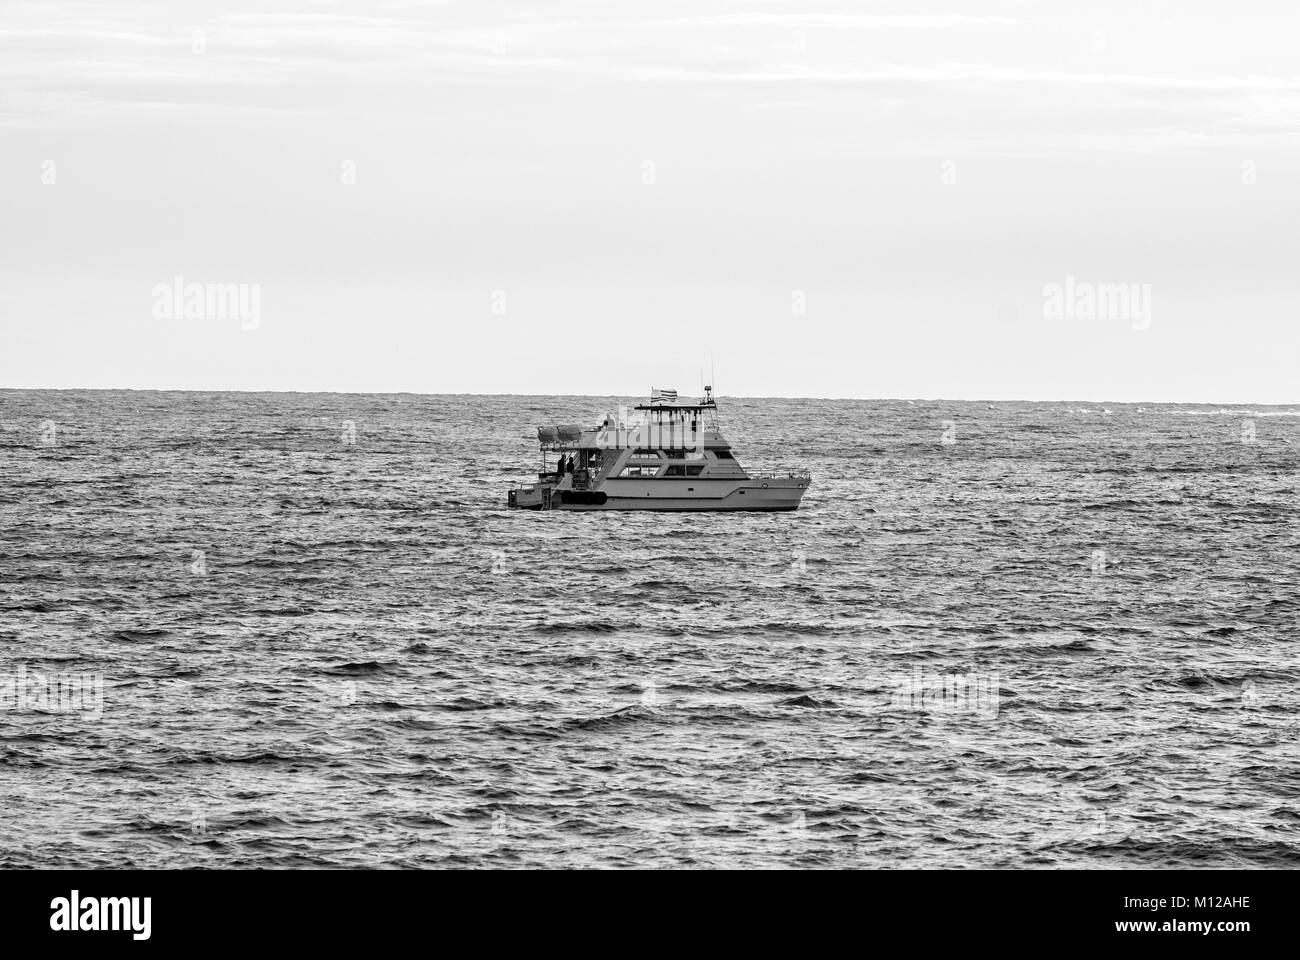 Lonely boat in the middle of the ocean. Black and white photo. Punta del Este, Uruguay Stock Photo